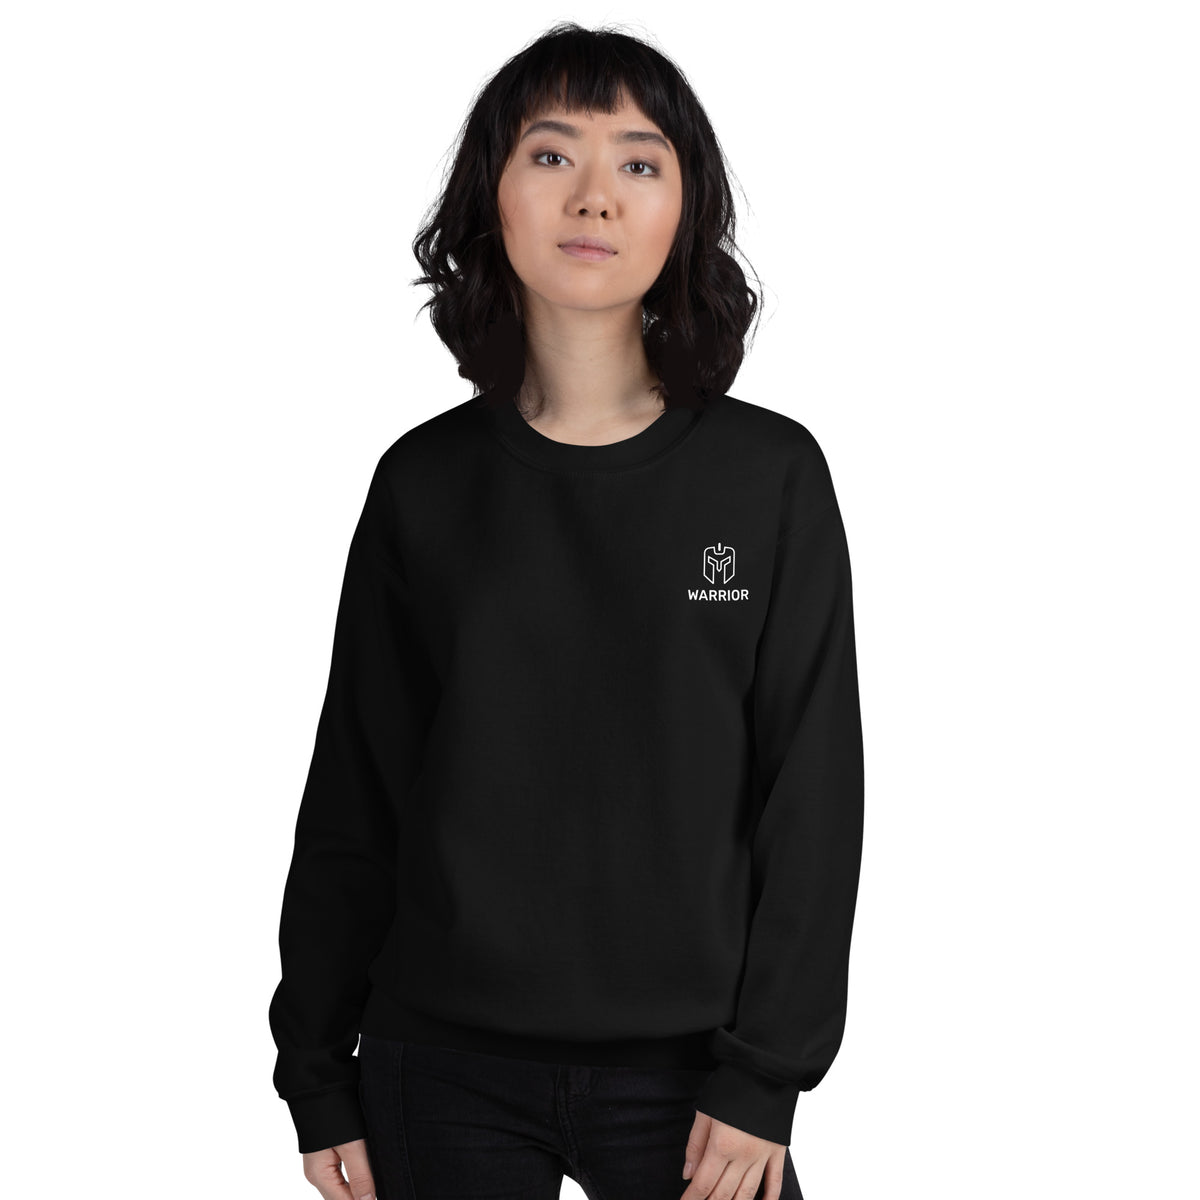 FORTUNA, ADIUVAT, FORTIS (Goddes of fortune and goodluck, save or aid, strong) Unisex Sweatshirt